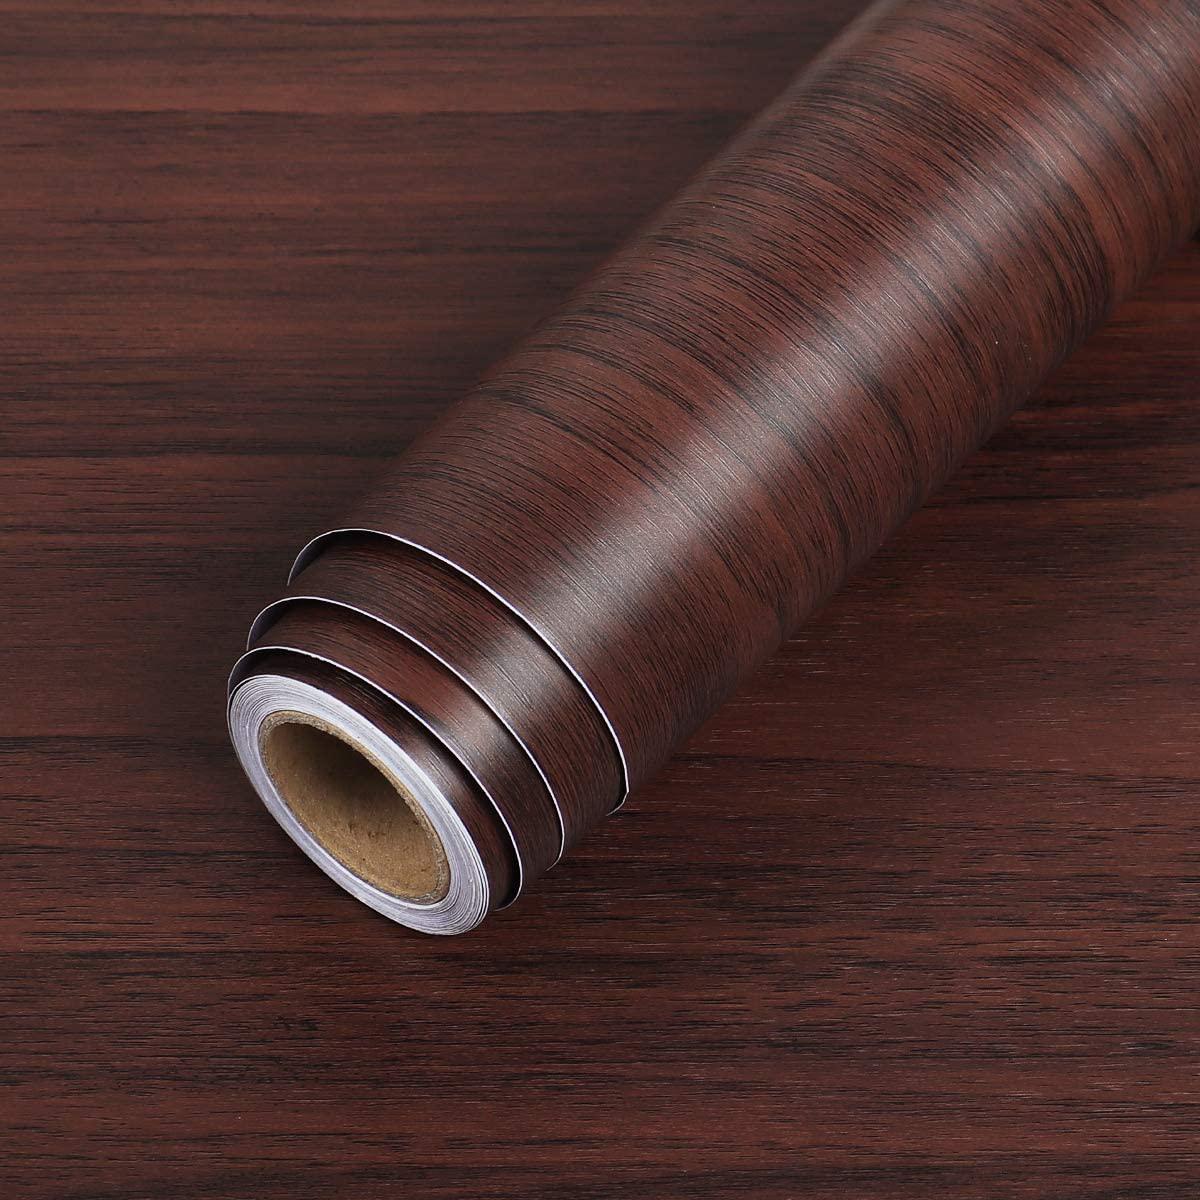 LACHEERY, LaCheery Dark Brown Wood Contact Paper 15.8 x80 Decorative Self Adhesive Counter Top Covers Removable Wood Wallpaper Peel and Stick Countertops for Kitchen Cabinets Closet Drawer Furniture Doors